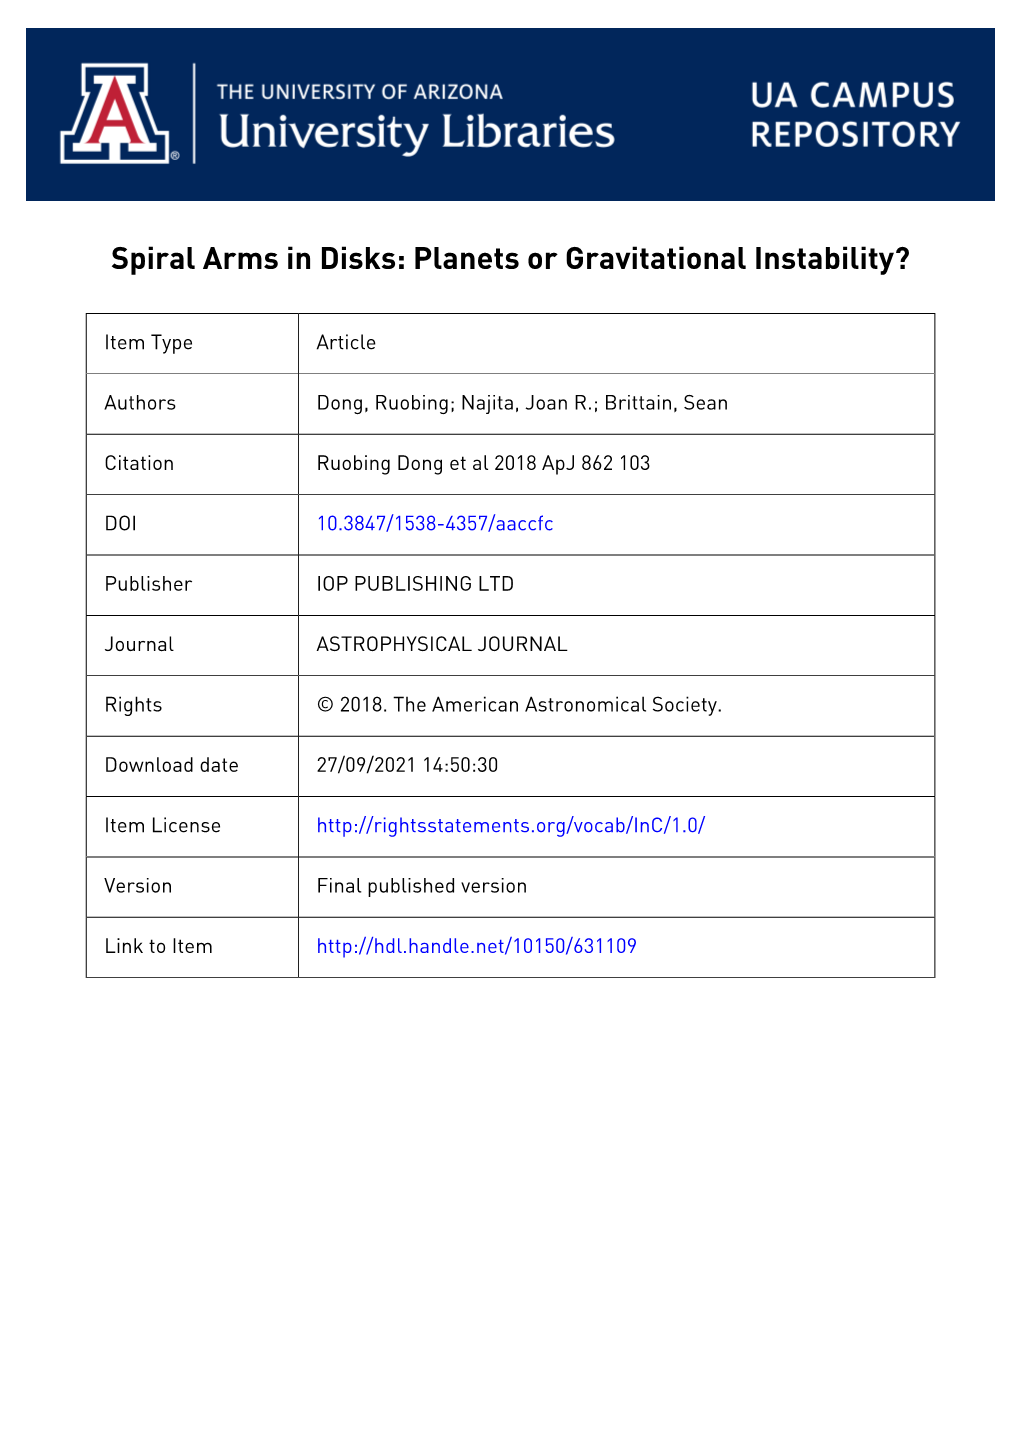 Spiral Arms in Disks: Planets Or Gravitational Instability?